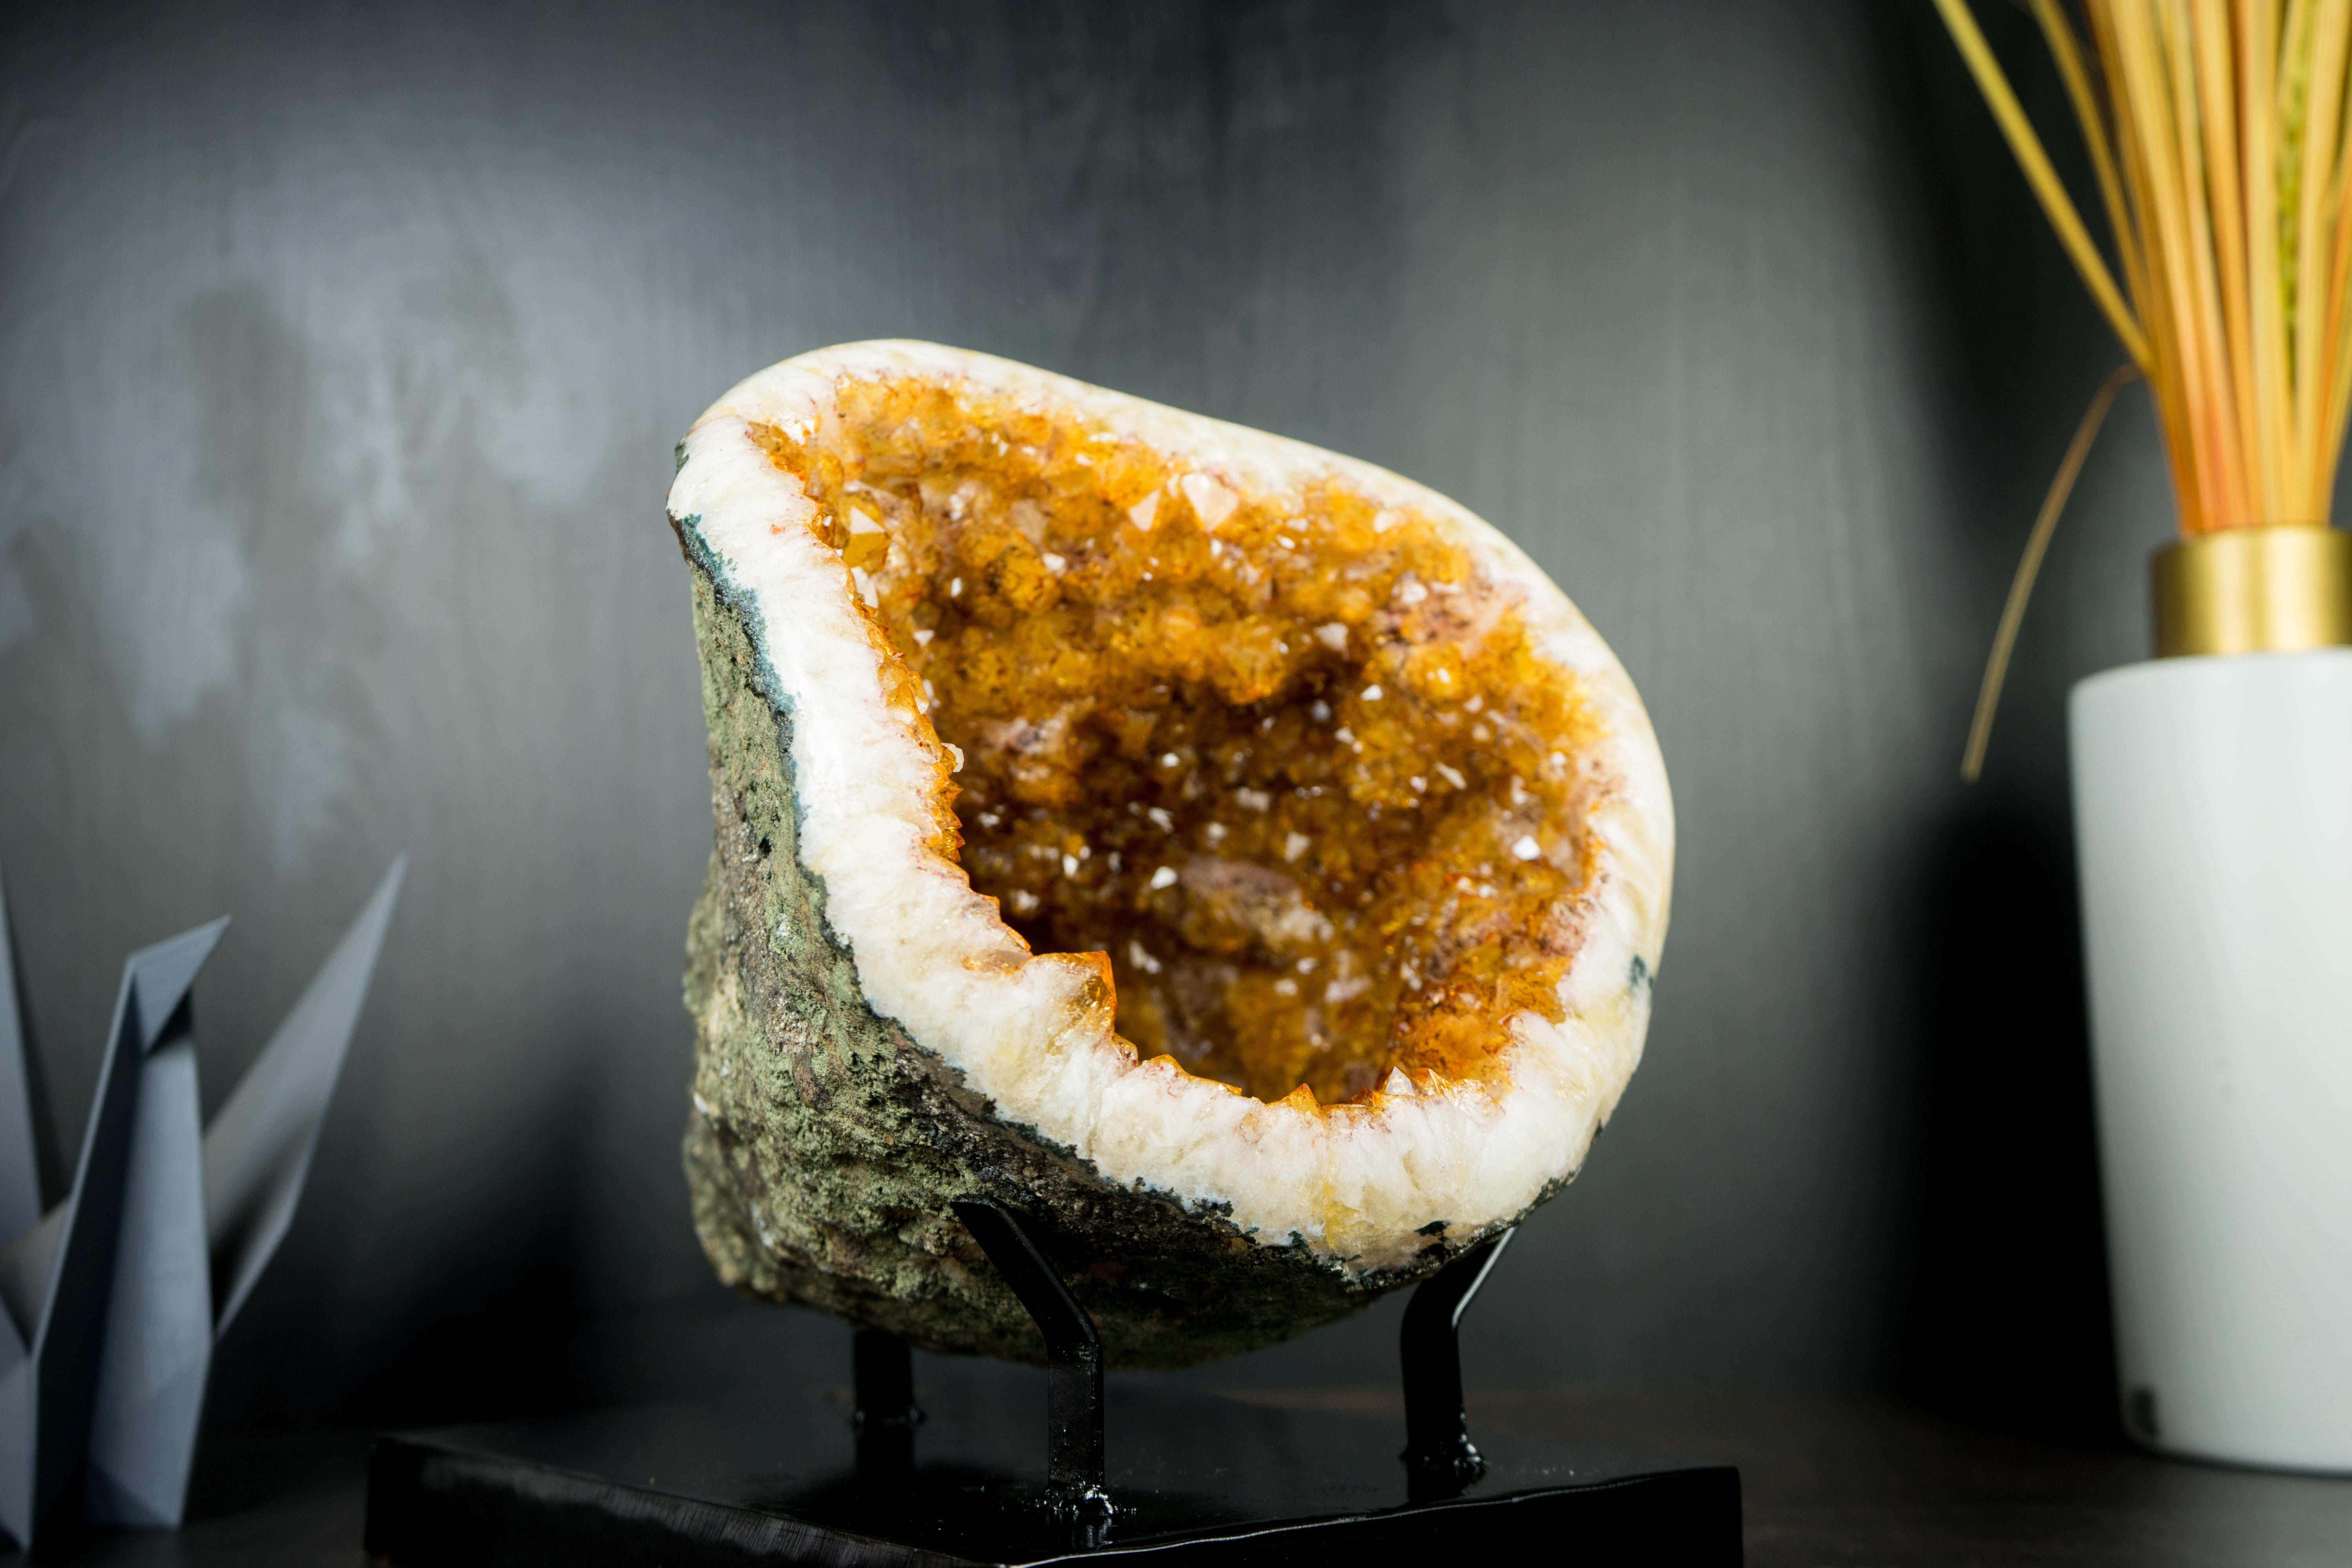 Citrine Geode Cave with High-Grade Orange Citrine Druzy - A All-Natural, Perfect Citrine Geode

▫️ Description

With its golden-orange hue and naturally beautiful cave-like shape, this Citrine Geode offers substantial beauty in a compact form.